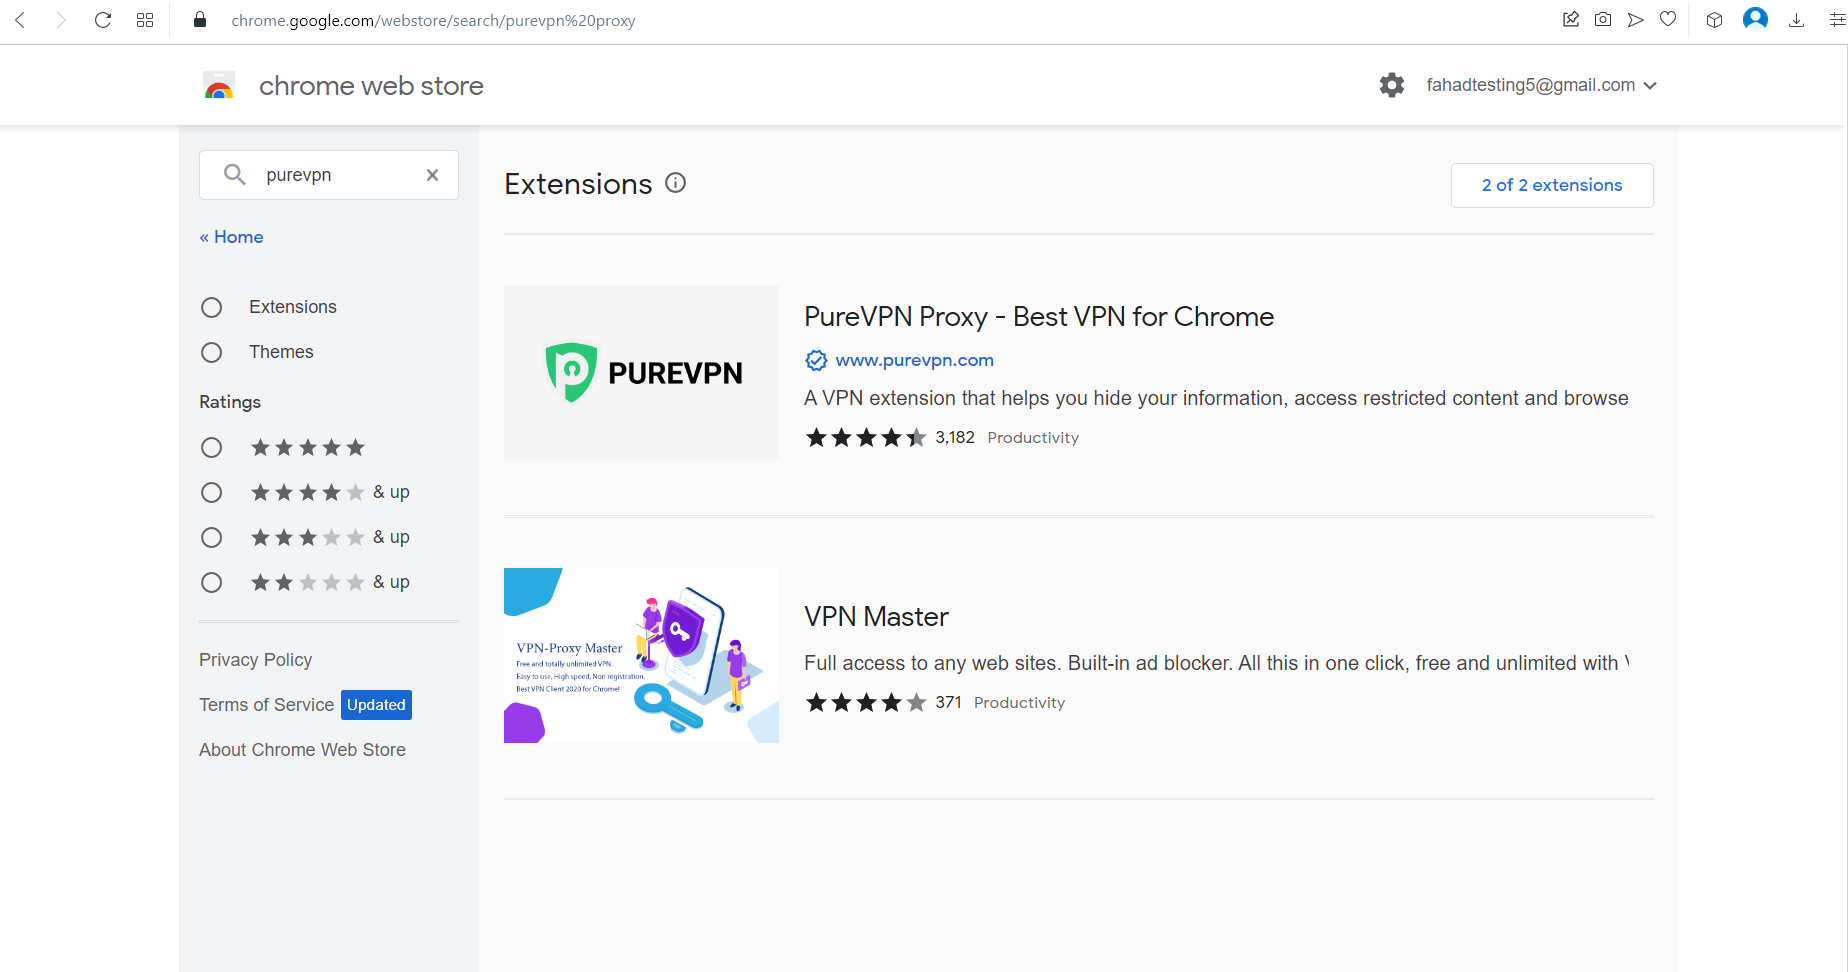 Popular proxy extensions for Opera - TOP 5